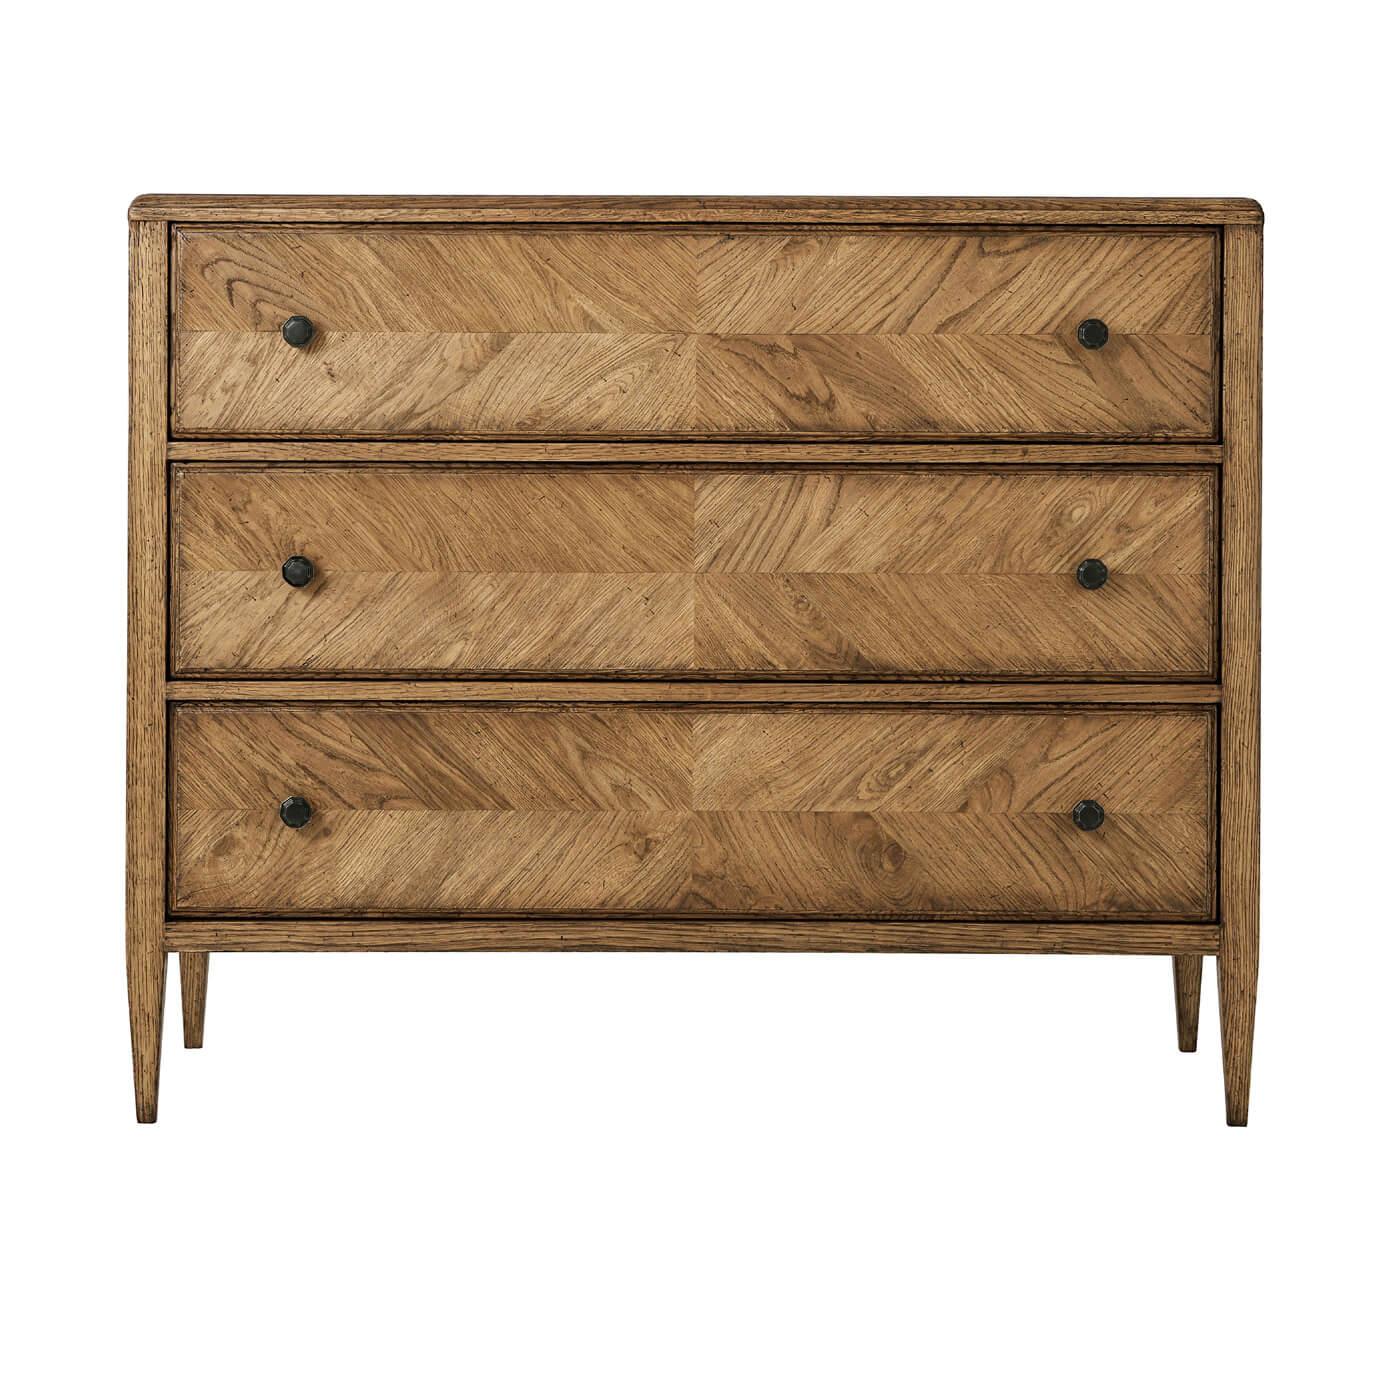 A rustic chest of drawers crafted with light rustic oak. It has a mirrored herringbone oak parquetry design with three oak-sculptured drawers accented with Verde Bronze finished knobs and beautifully tapered oak legs.

Dimensions: 46